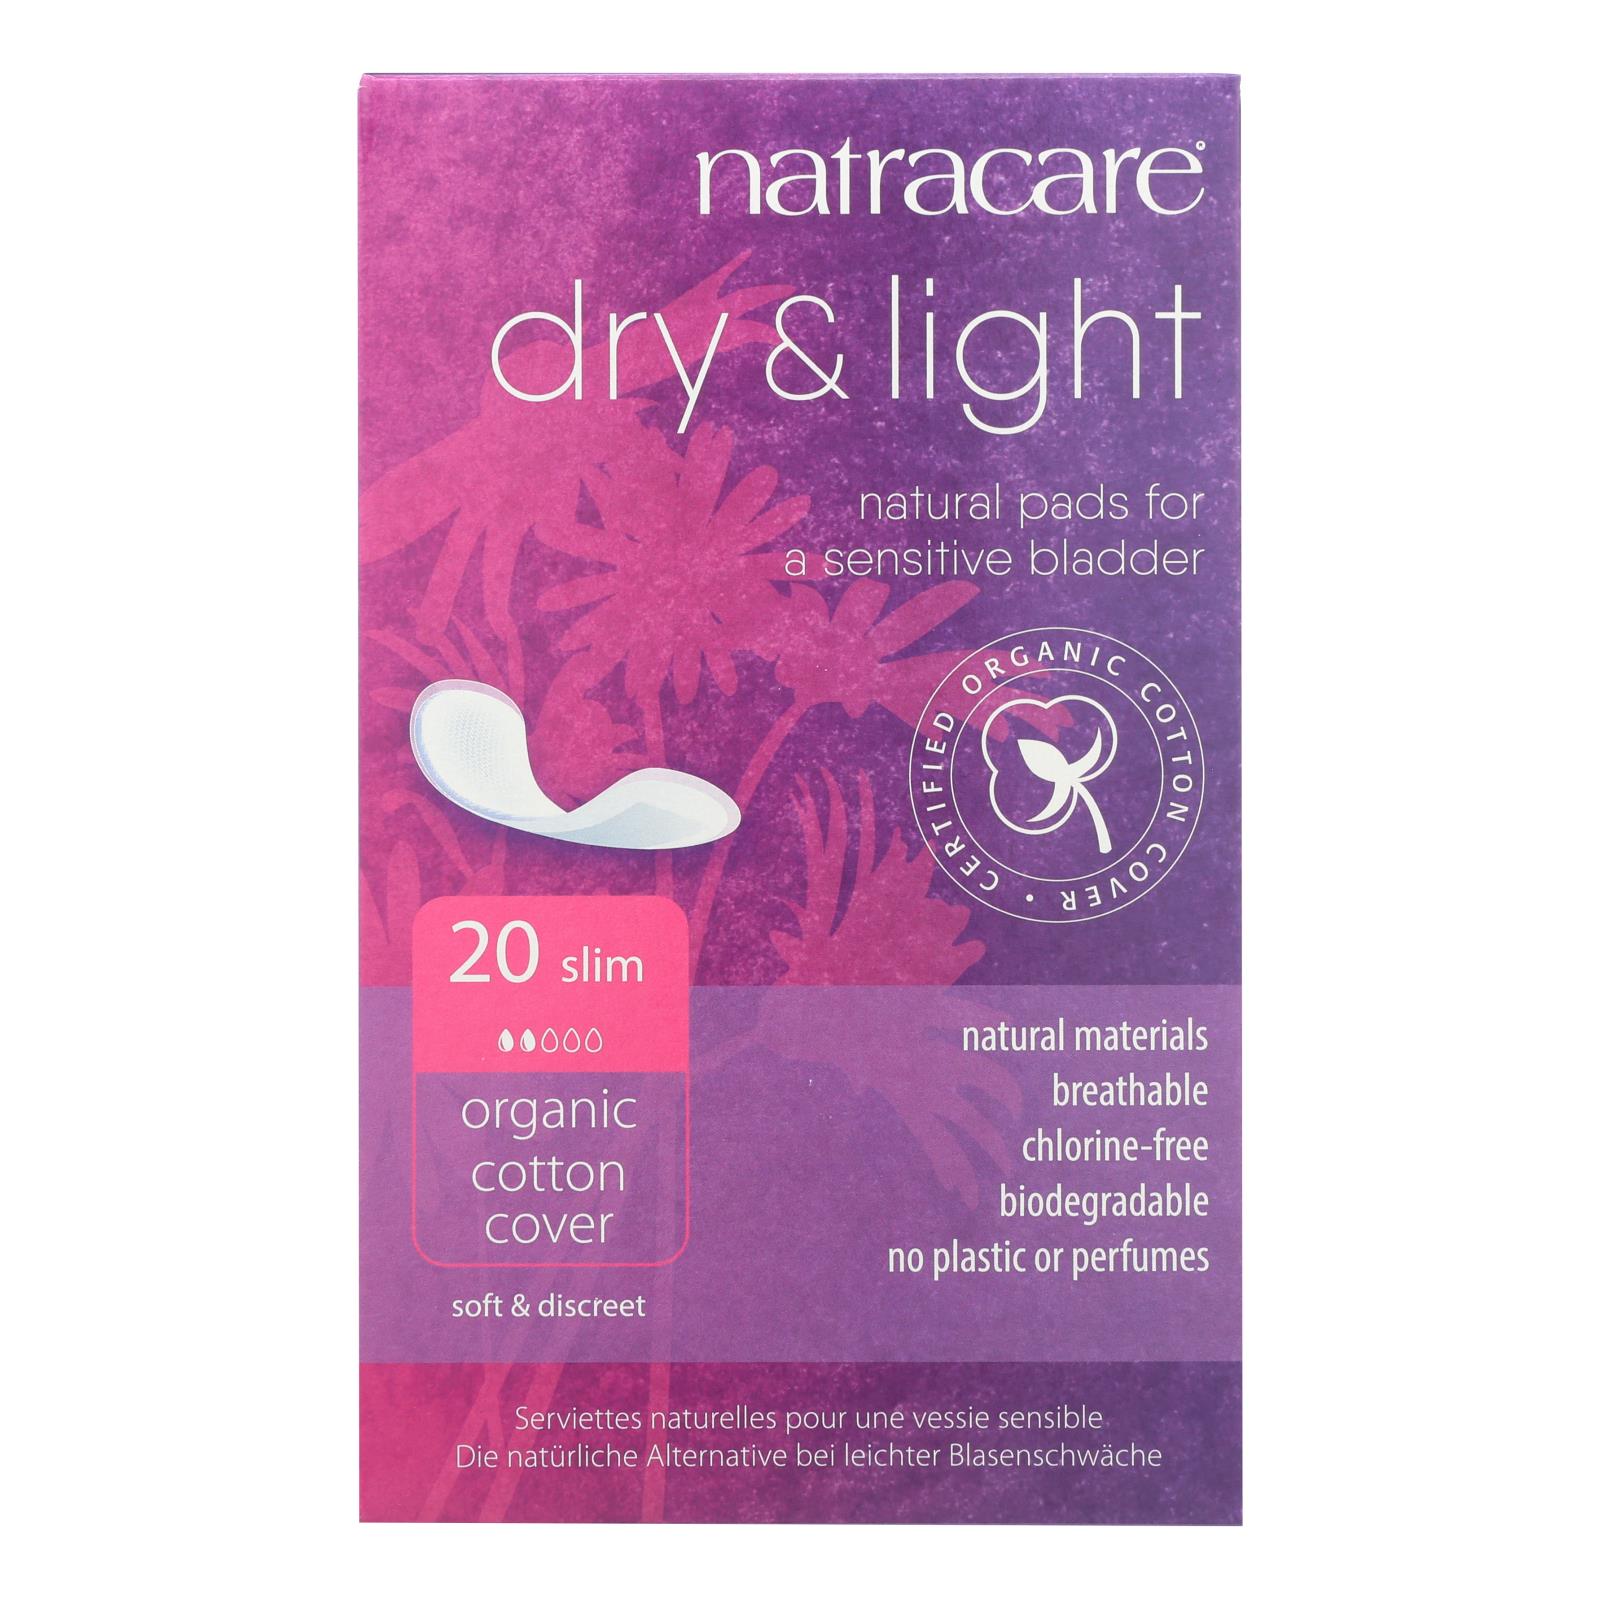 Natracare Dry + Light Natural Pads - Case of 6 - 20 CT